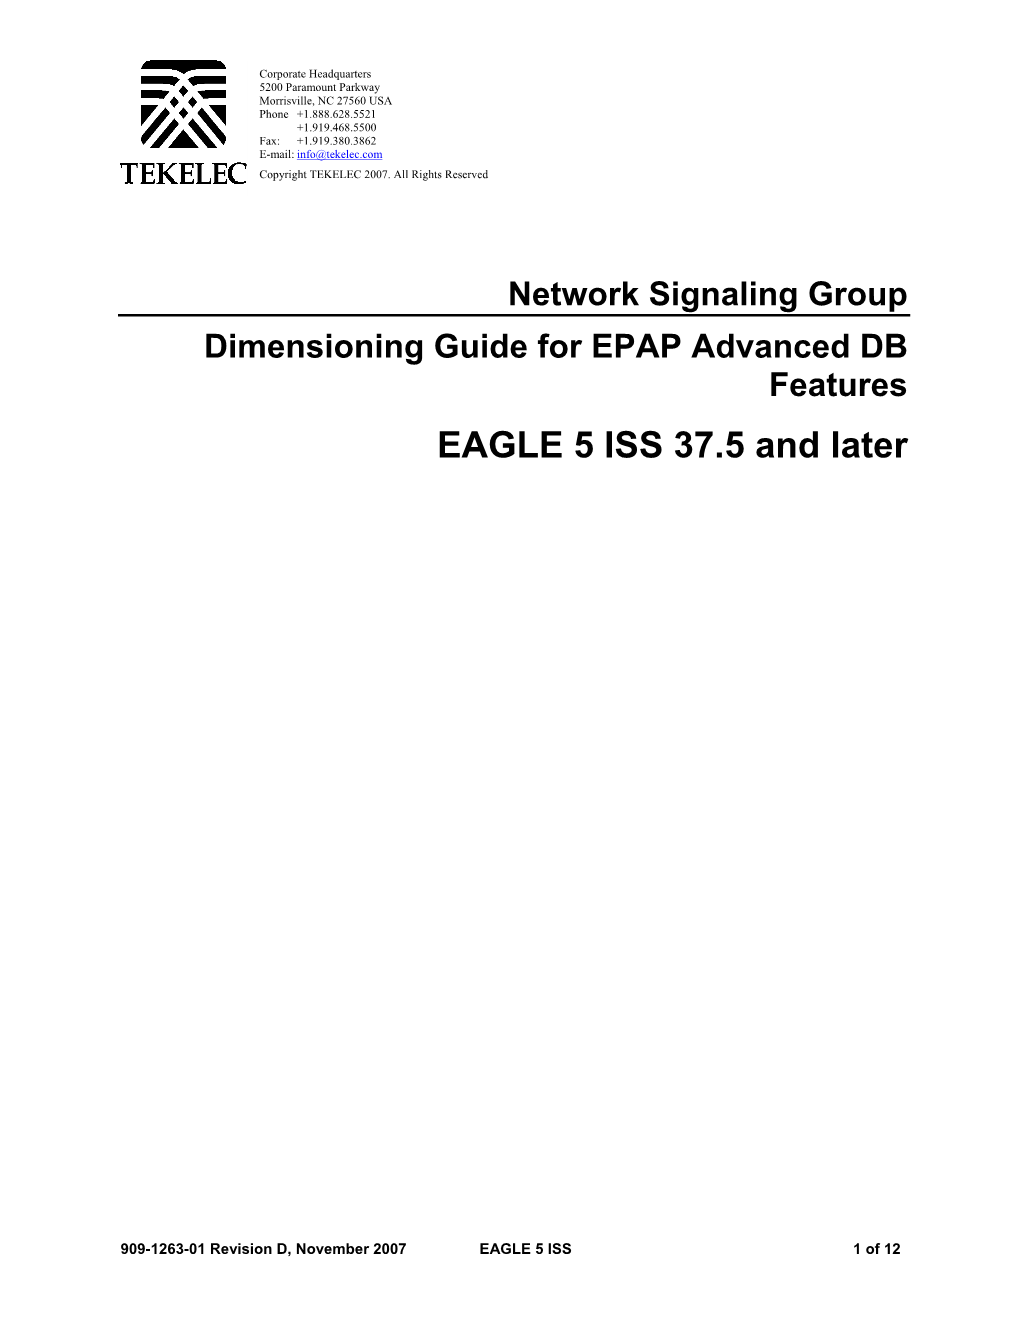 Dimensioning Guide for EPAP Advanced DB Features EAGLE 5 ISS 37.5 and Later